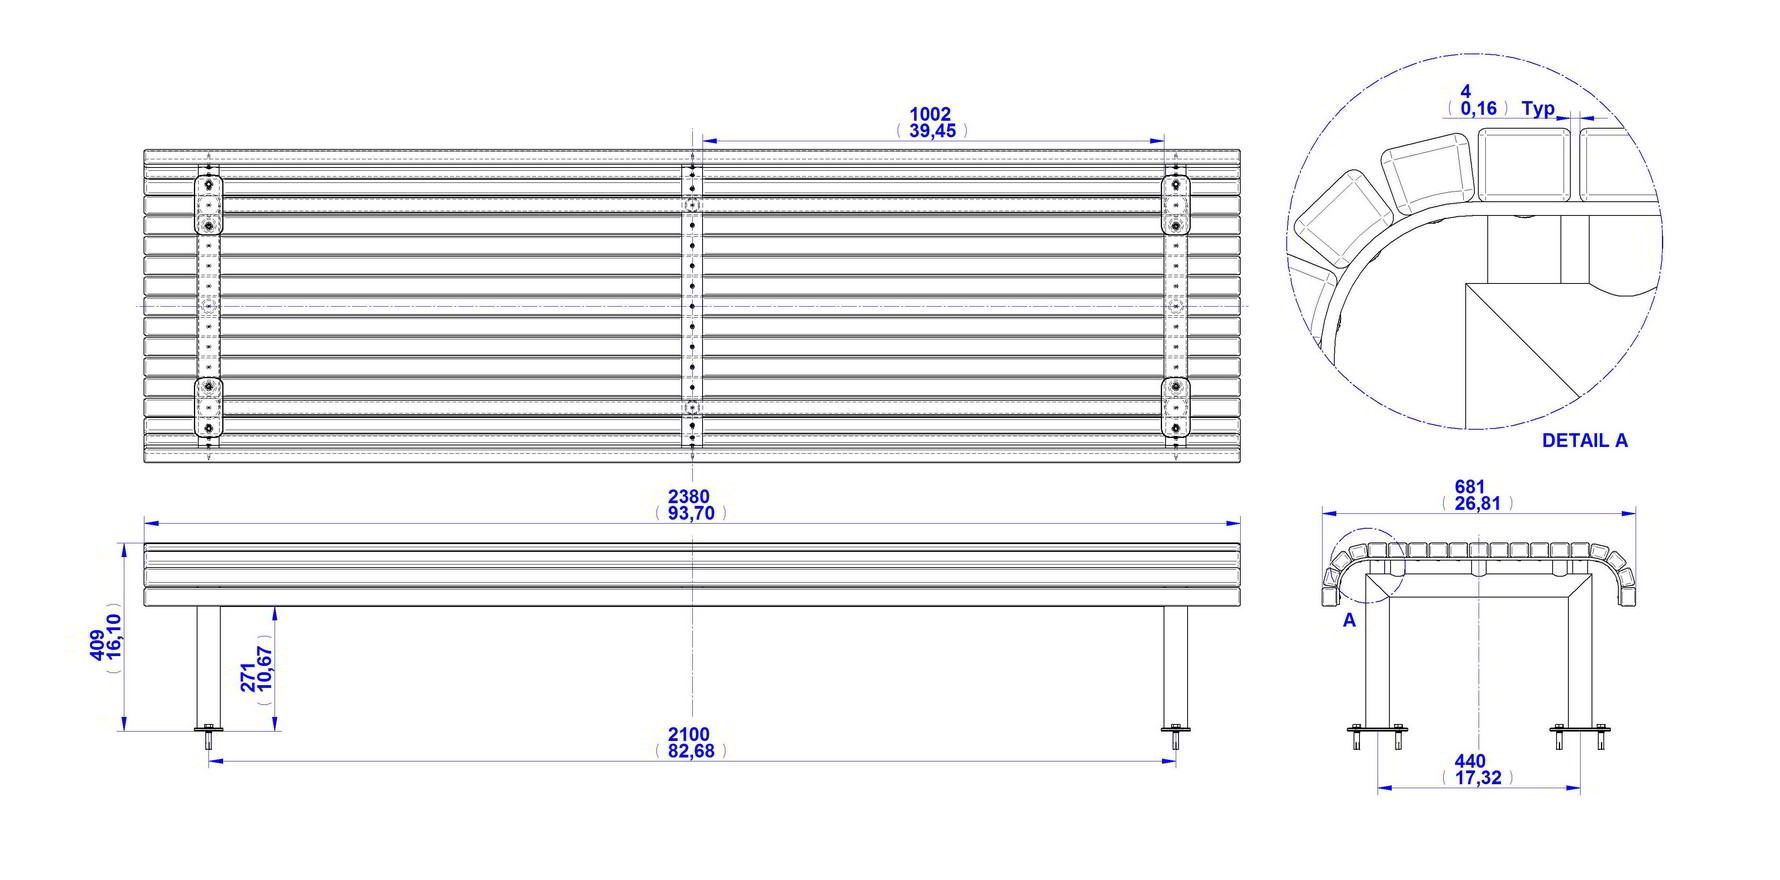 Home » Woodworking Plans » Free Wood Park Bench Plans